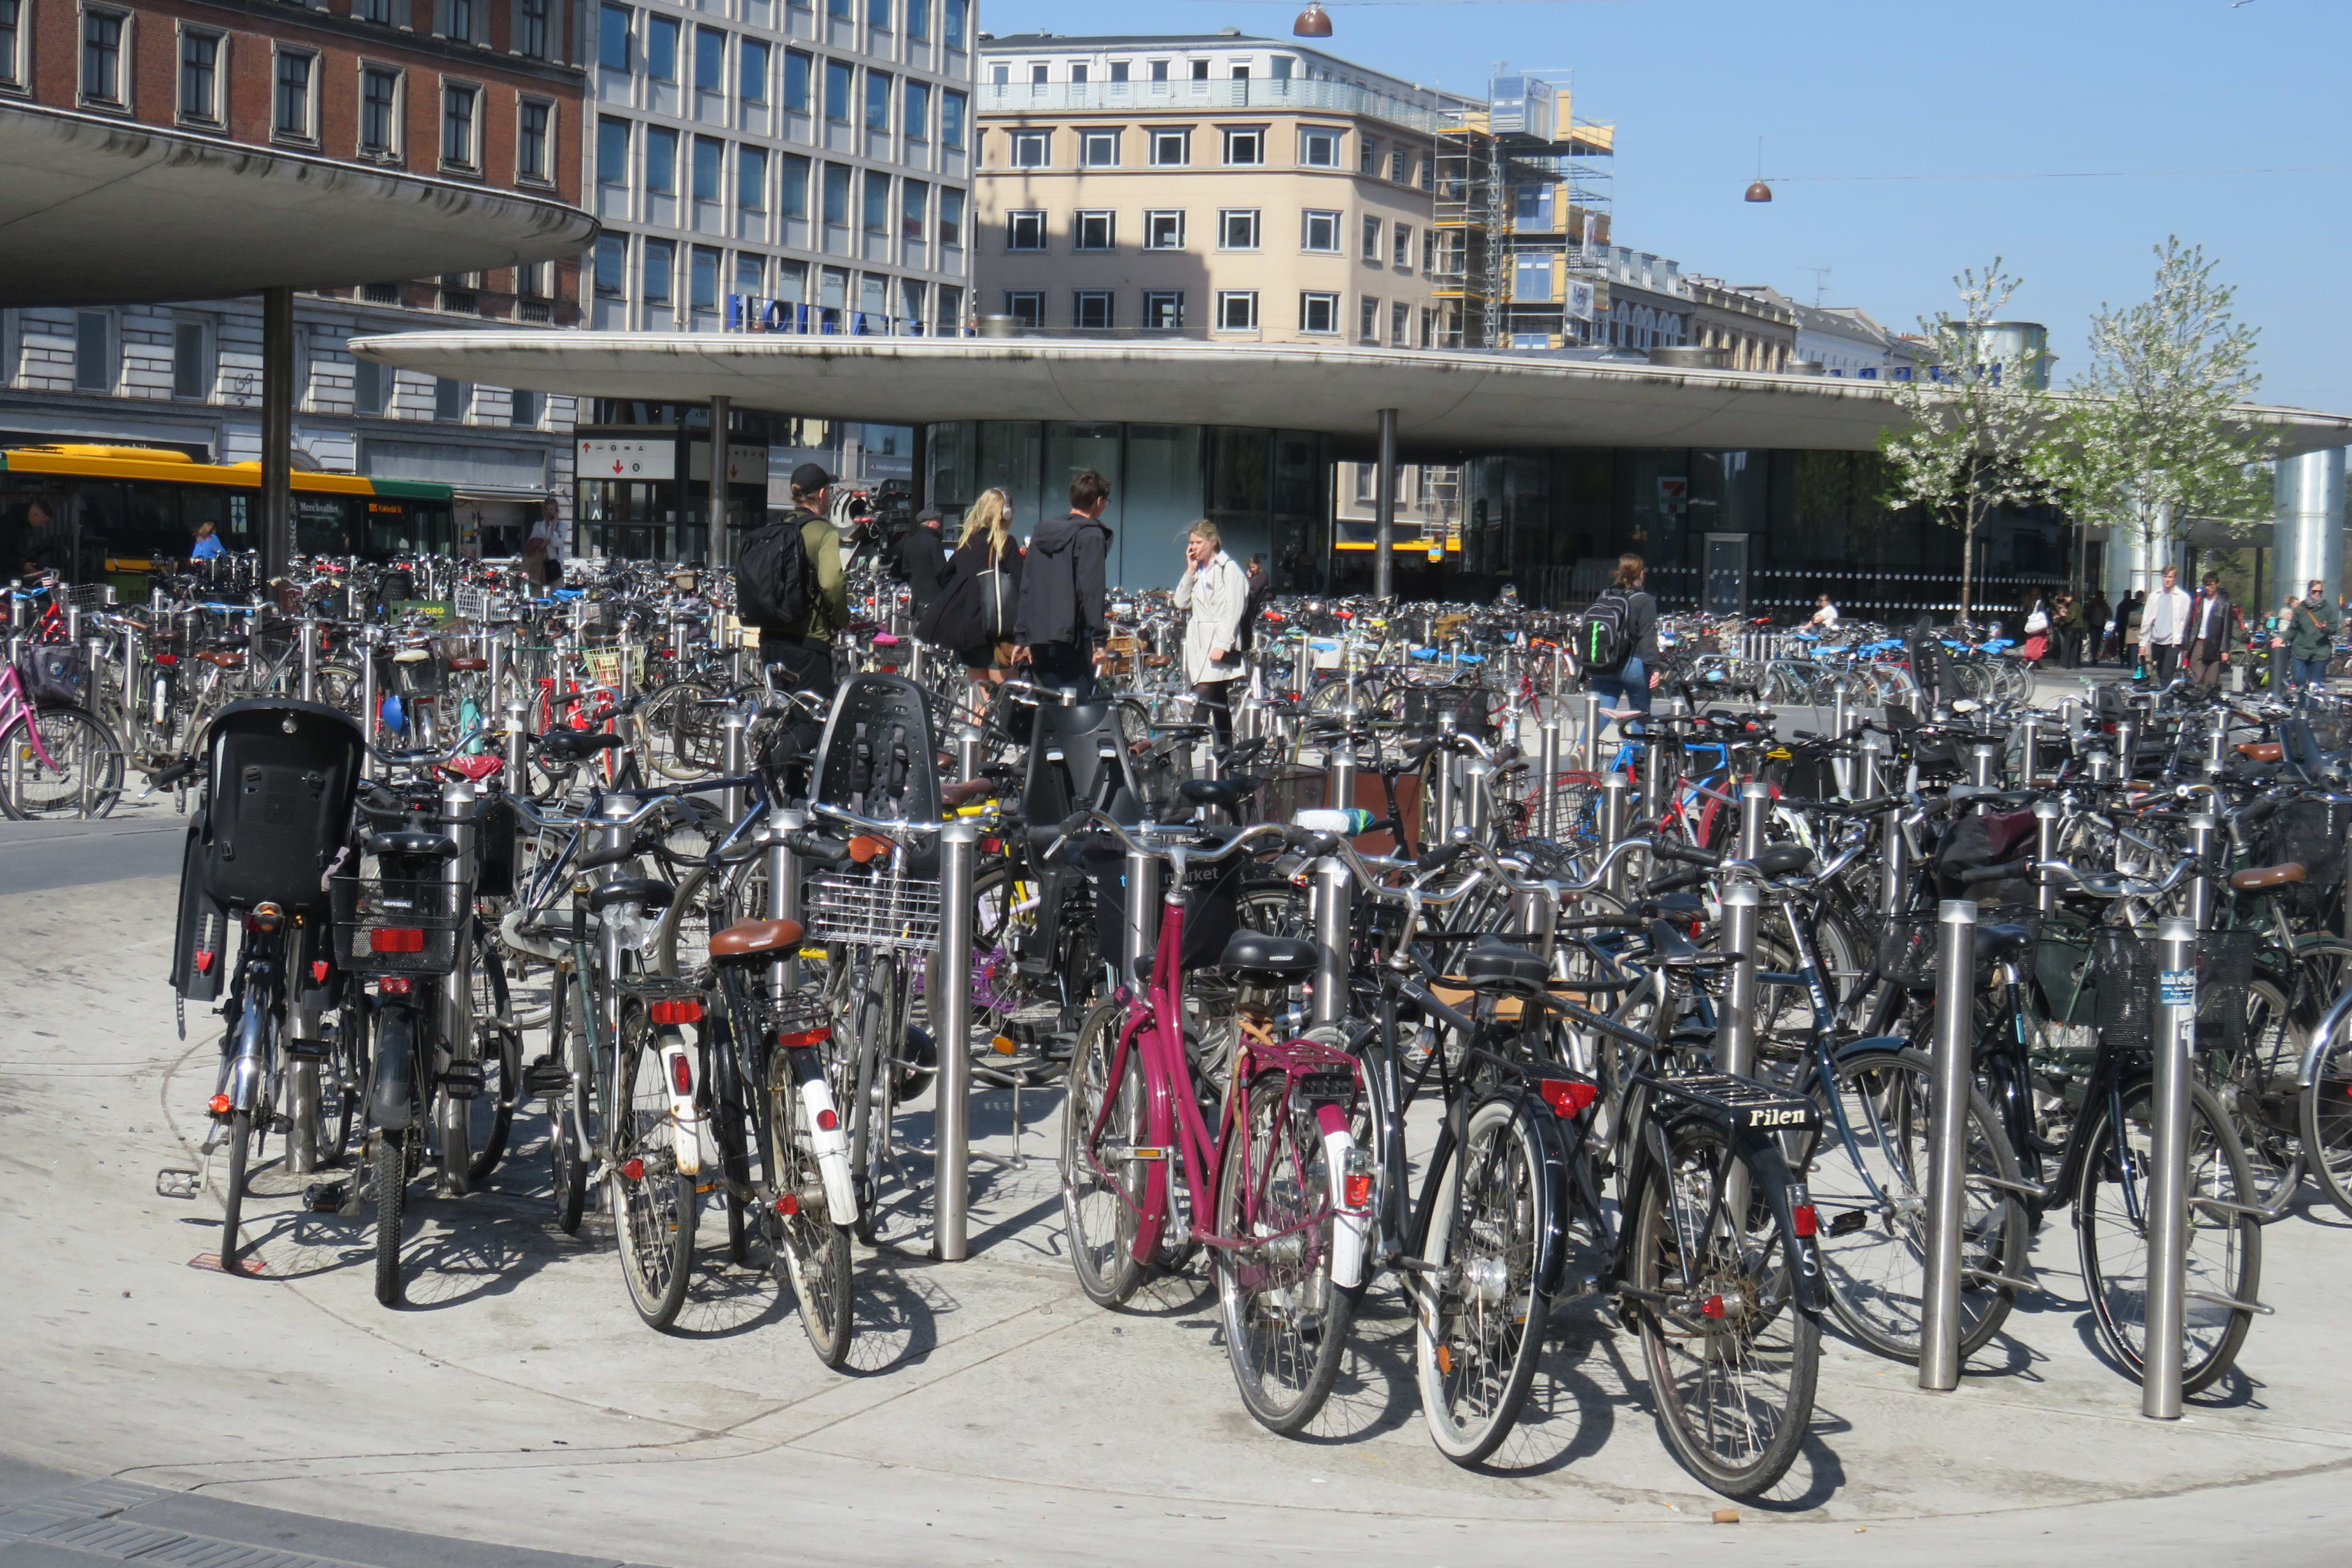 Image of bikes in front of a subway station